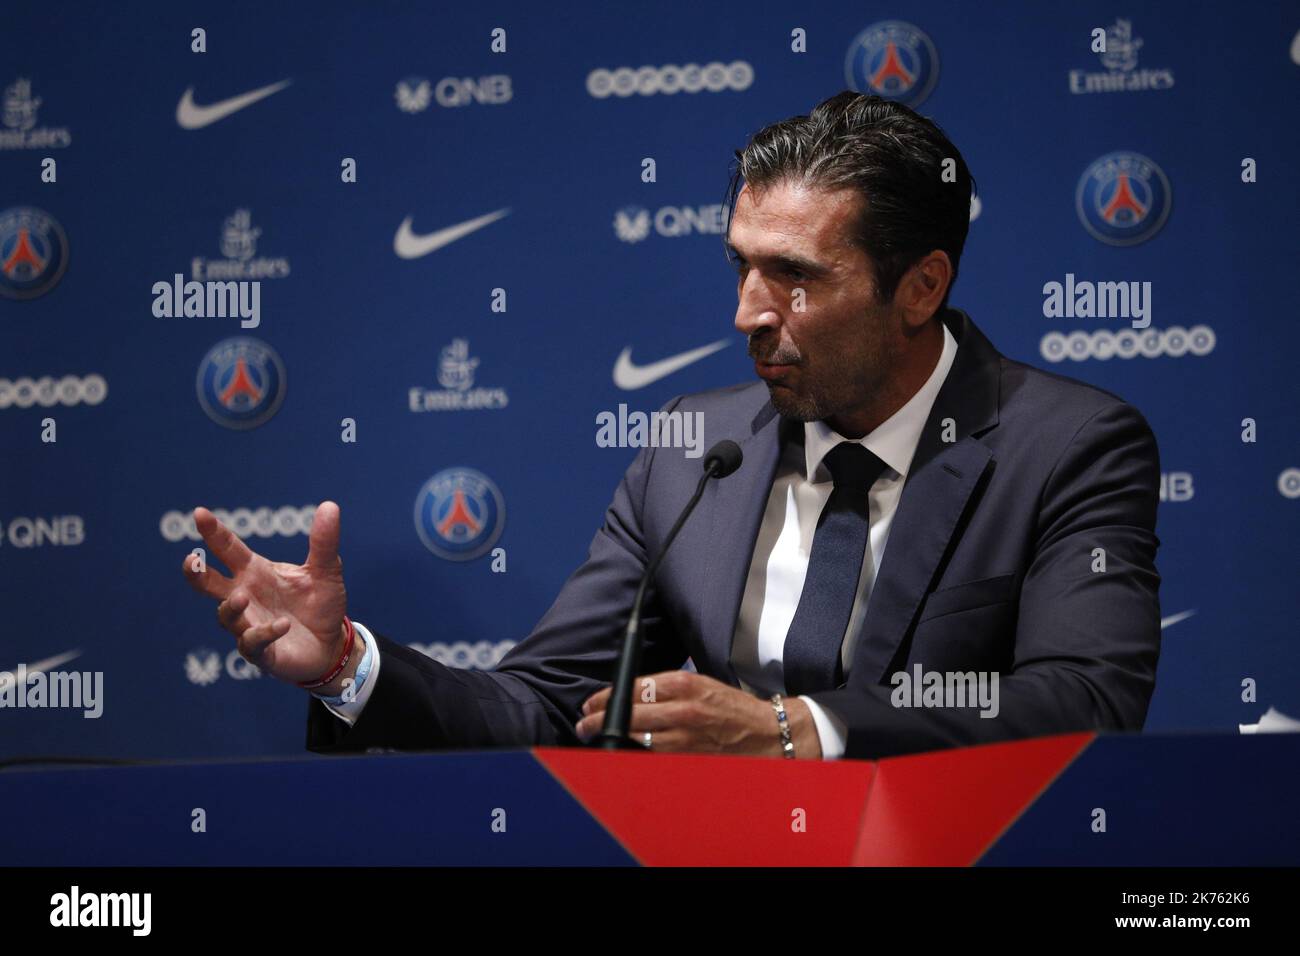 Italian goalkeeper Gianluigi Buffon, who has signed up for PSG, is officially presented to the press at Parc des Princes in the presence of his family and Nasser Ben Ghanim Al-Khelaïfi. Stock Photo